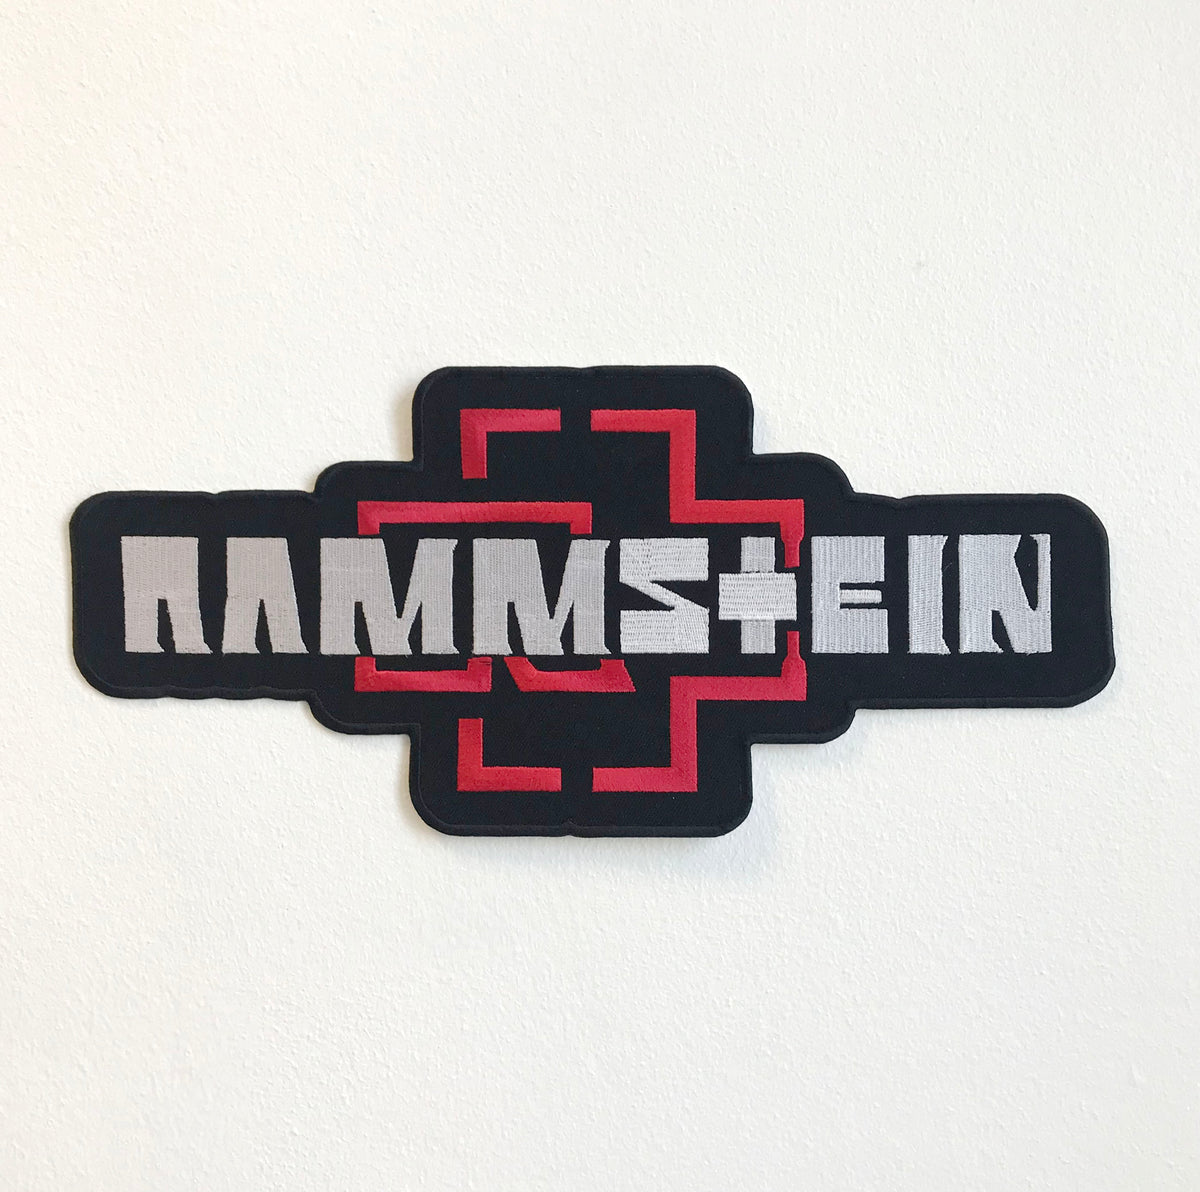 Rammstein Music Band Large Biker Jacket Back Sew On Embroidered Patch